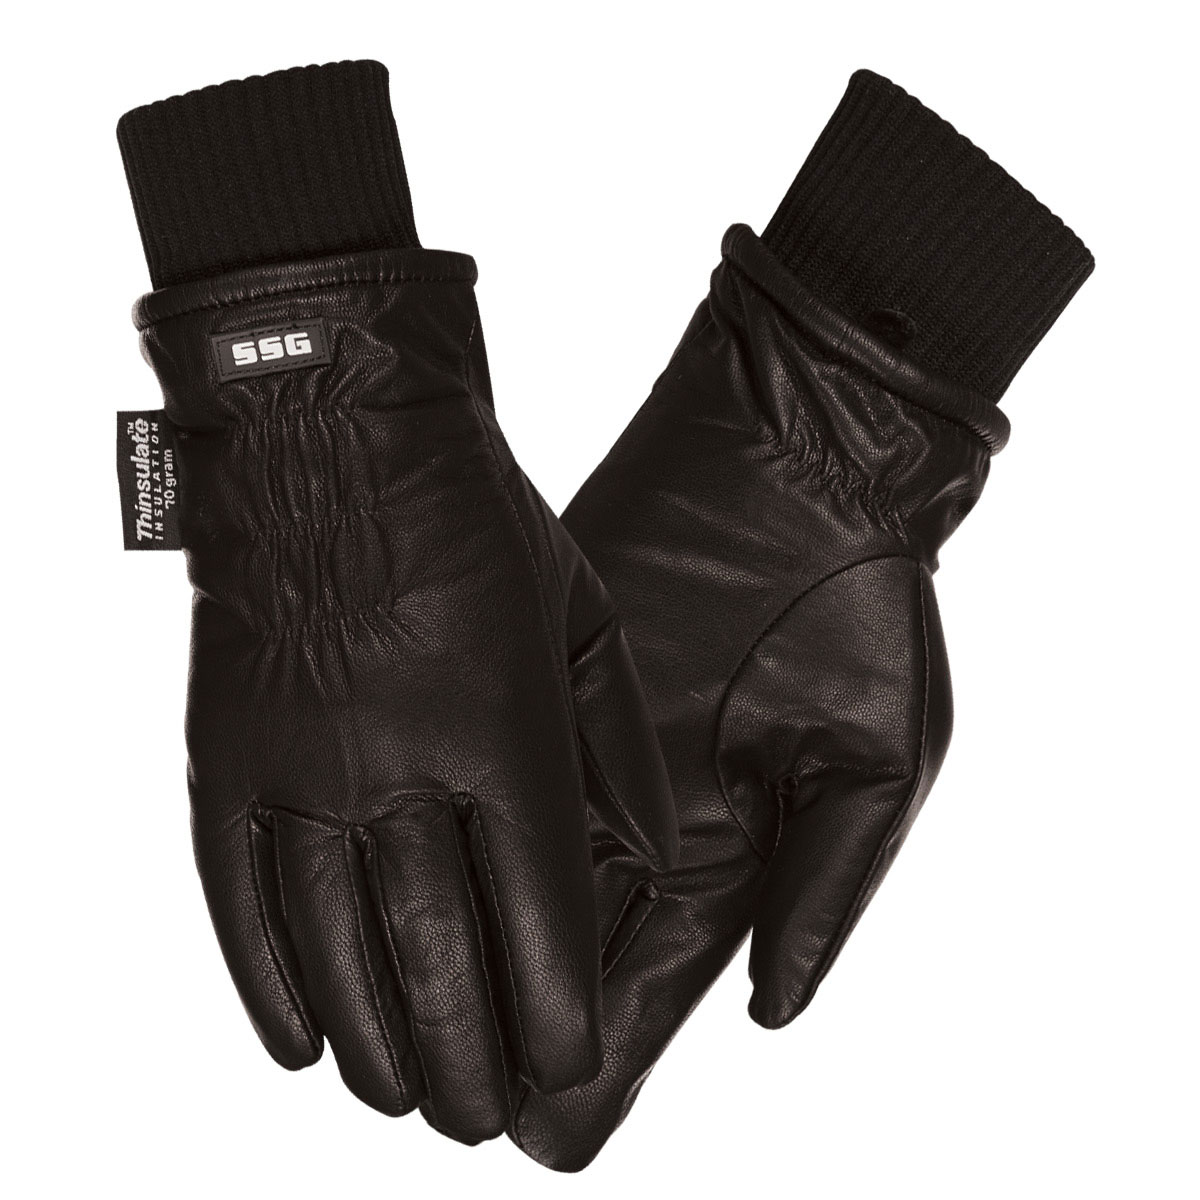 Aimeely Mens Classic Winter Thicker Warm Windproof Outdoor Riding Sports Gloves 